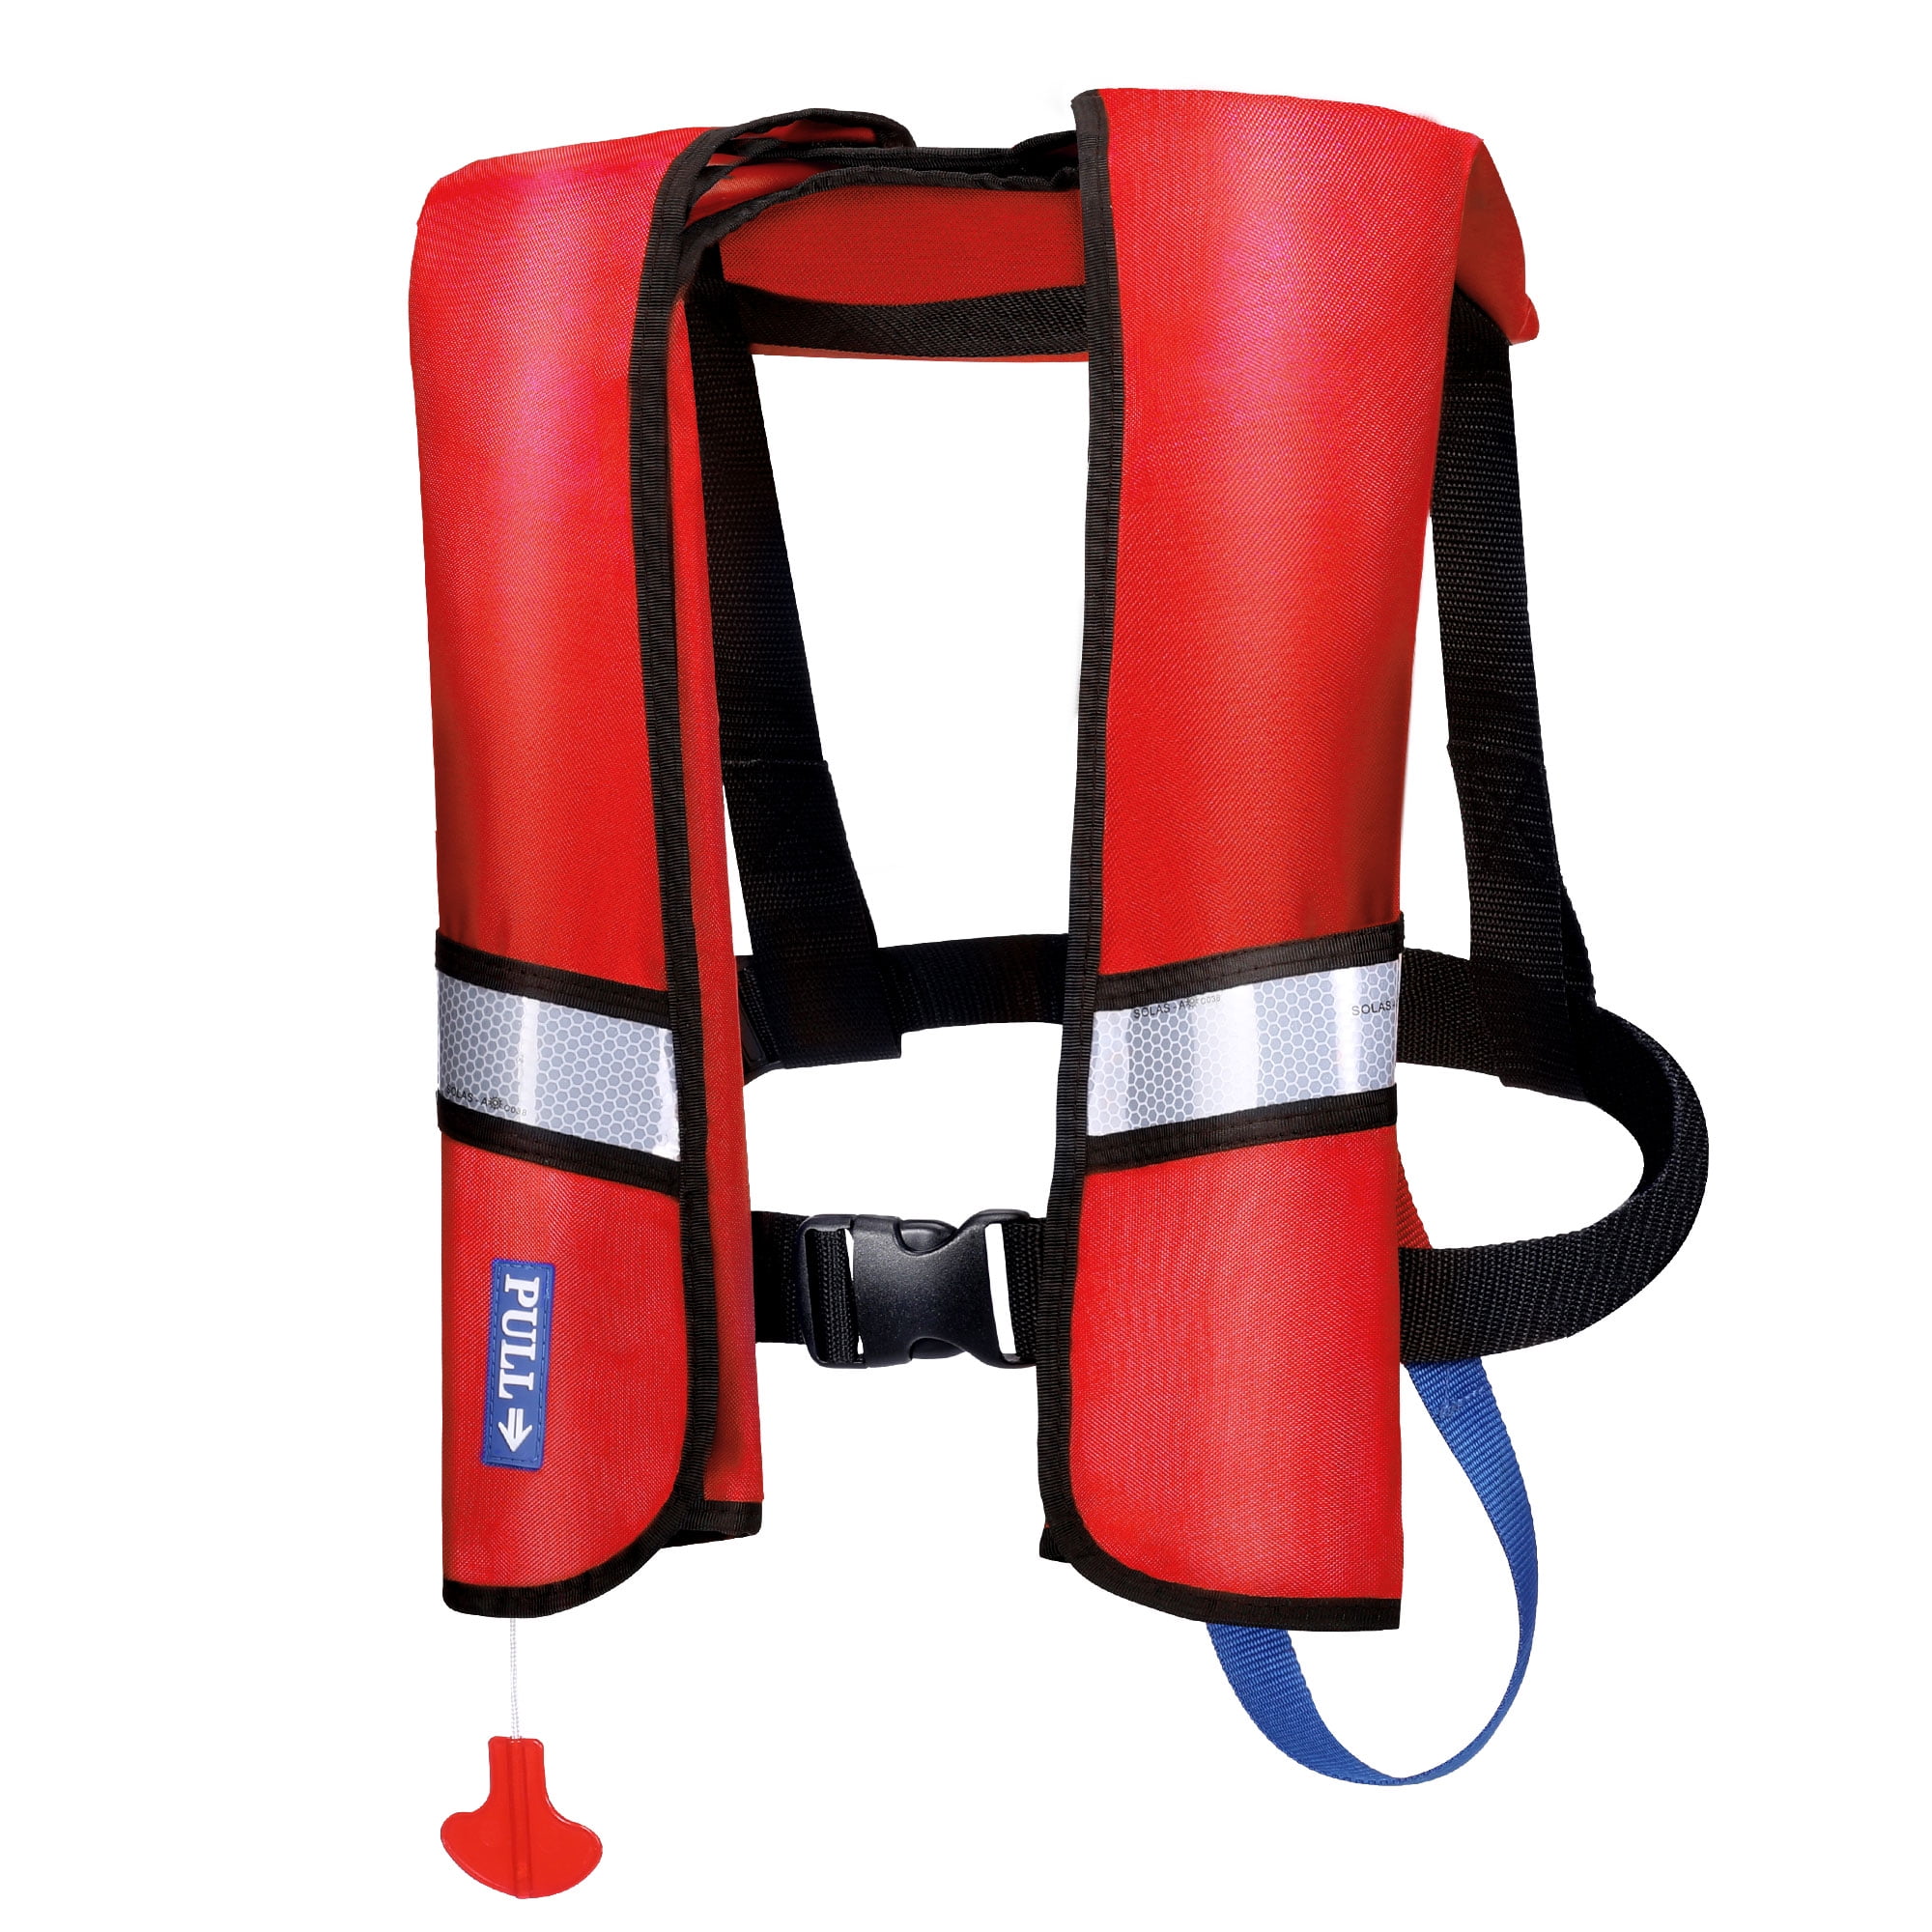 Automatic Inflatable Life Jacket with Reflectors, Safety Adult Life Jacket PFD Survival Buoyancy Life Vest for Boating Fishing Sailing Kayaking